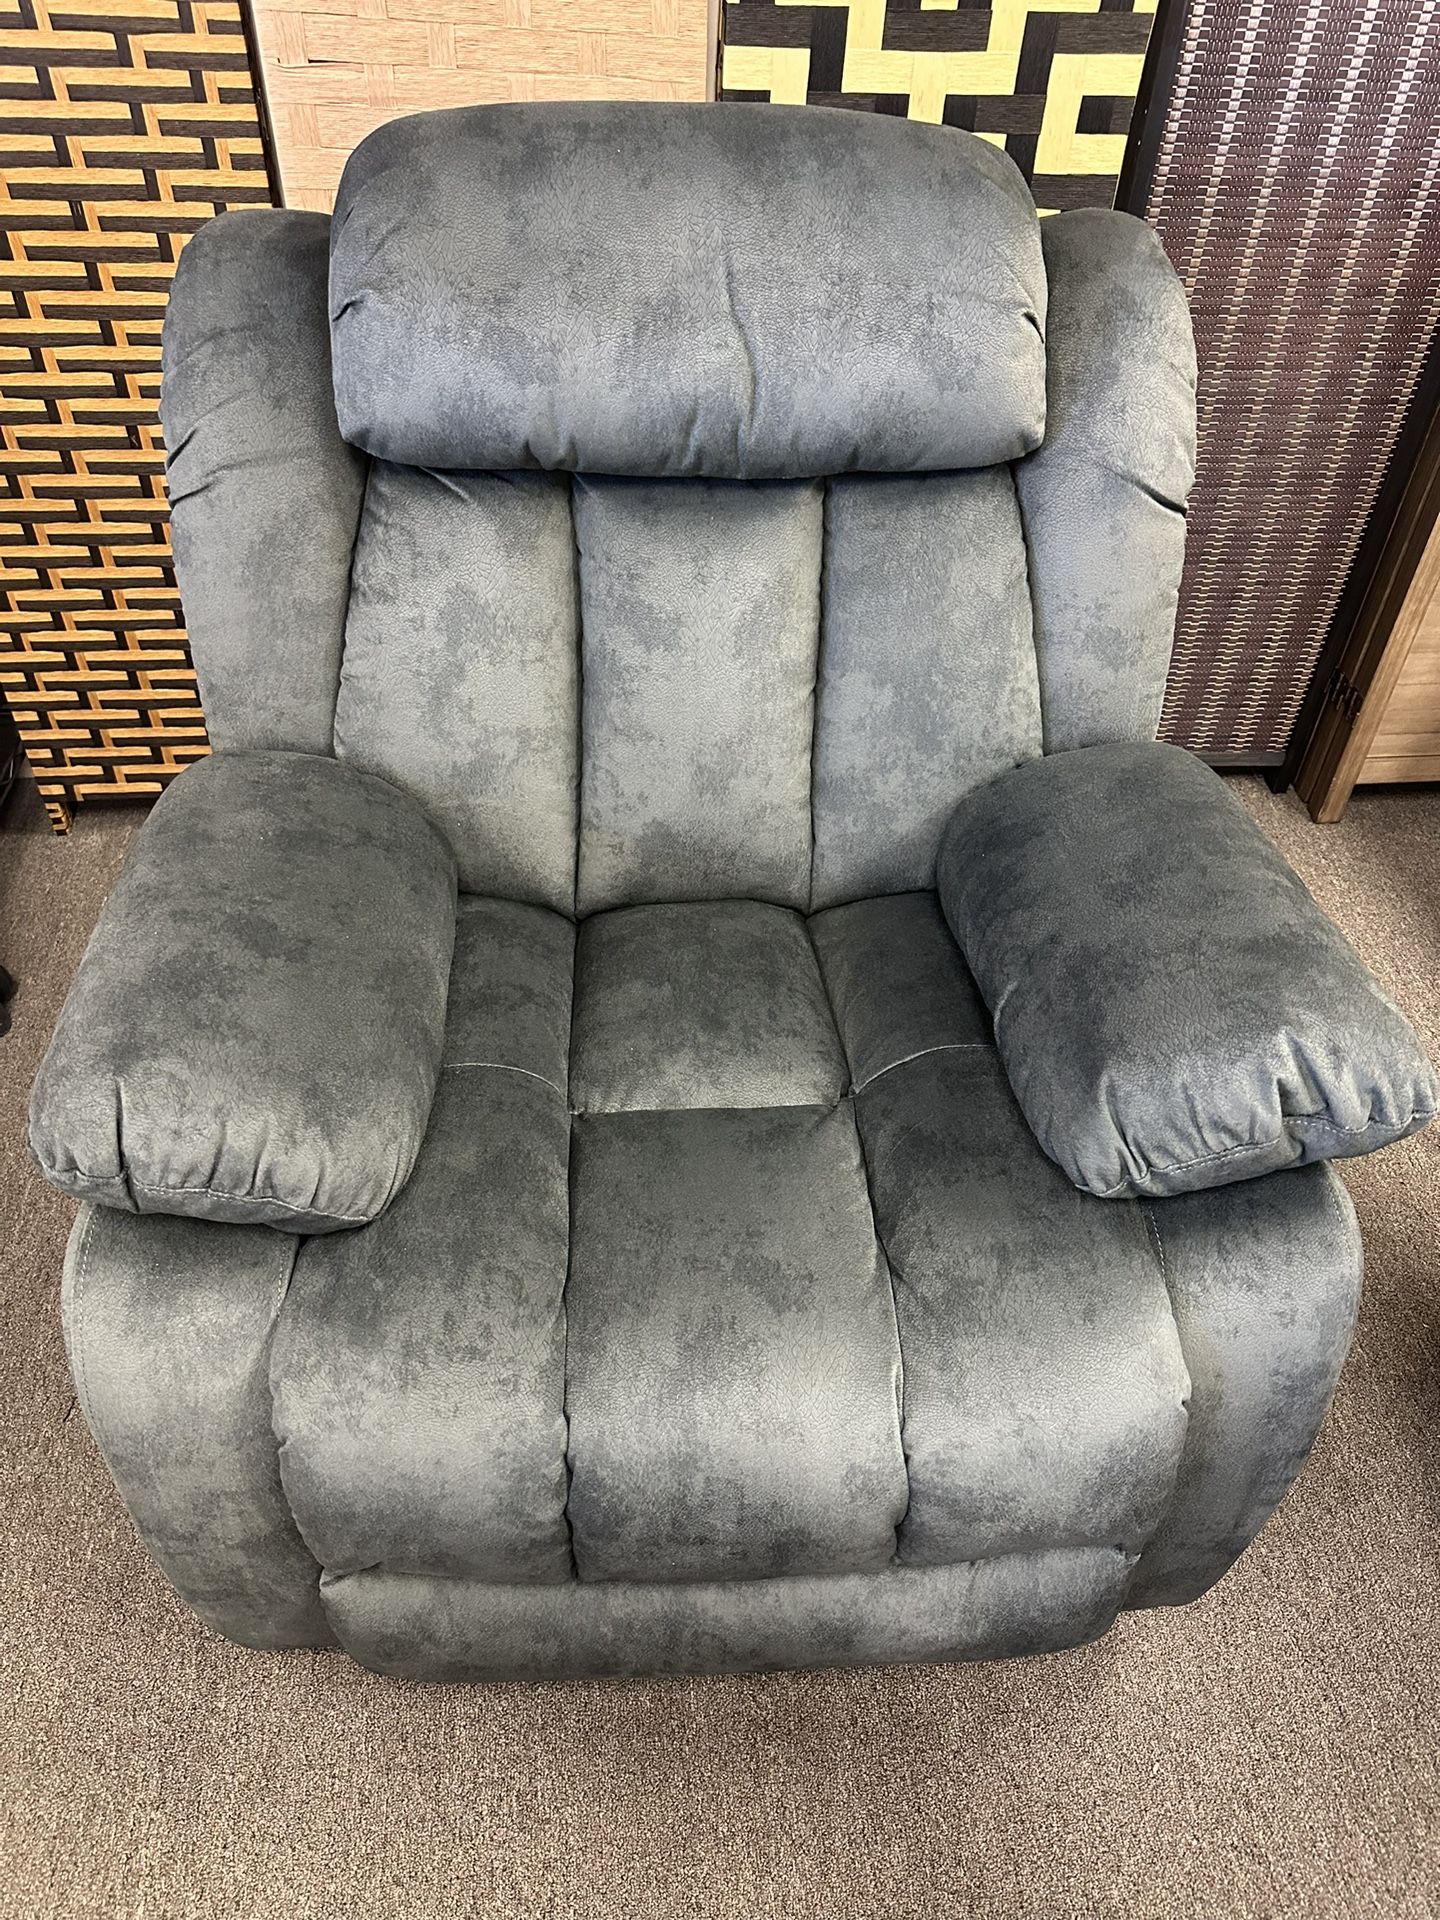 Massage Swivel Rocker Recliner with Heat and Vibration, Manual Rocking Recliner Chair with Vibrating